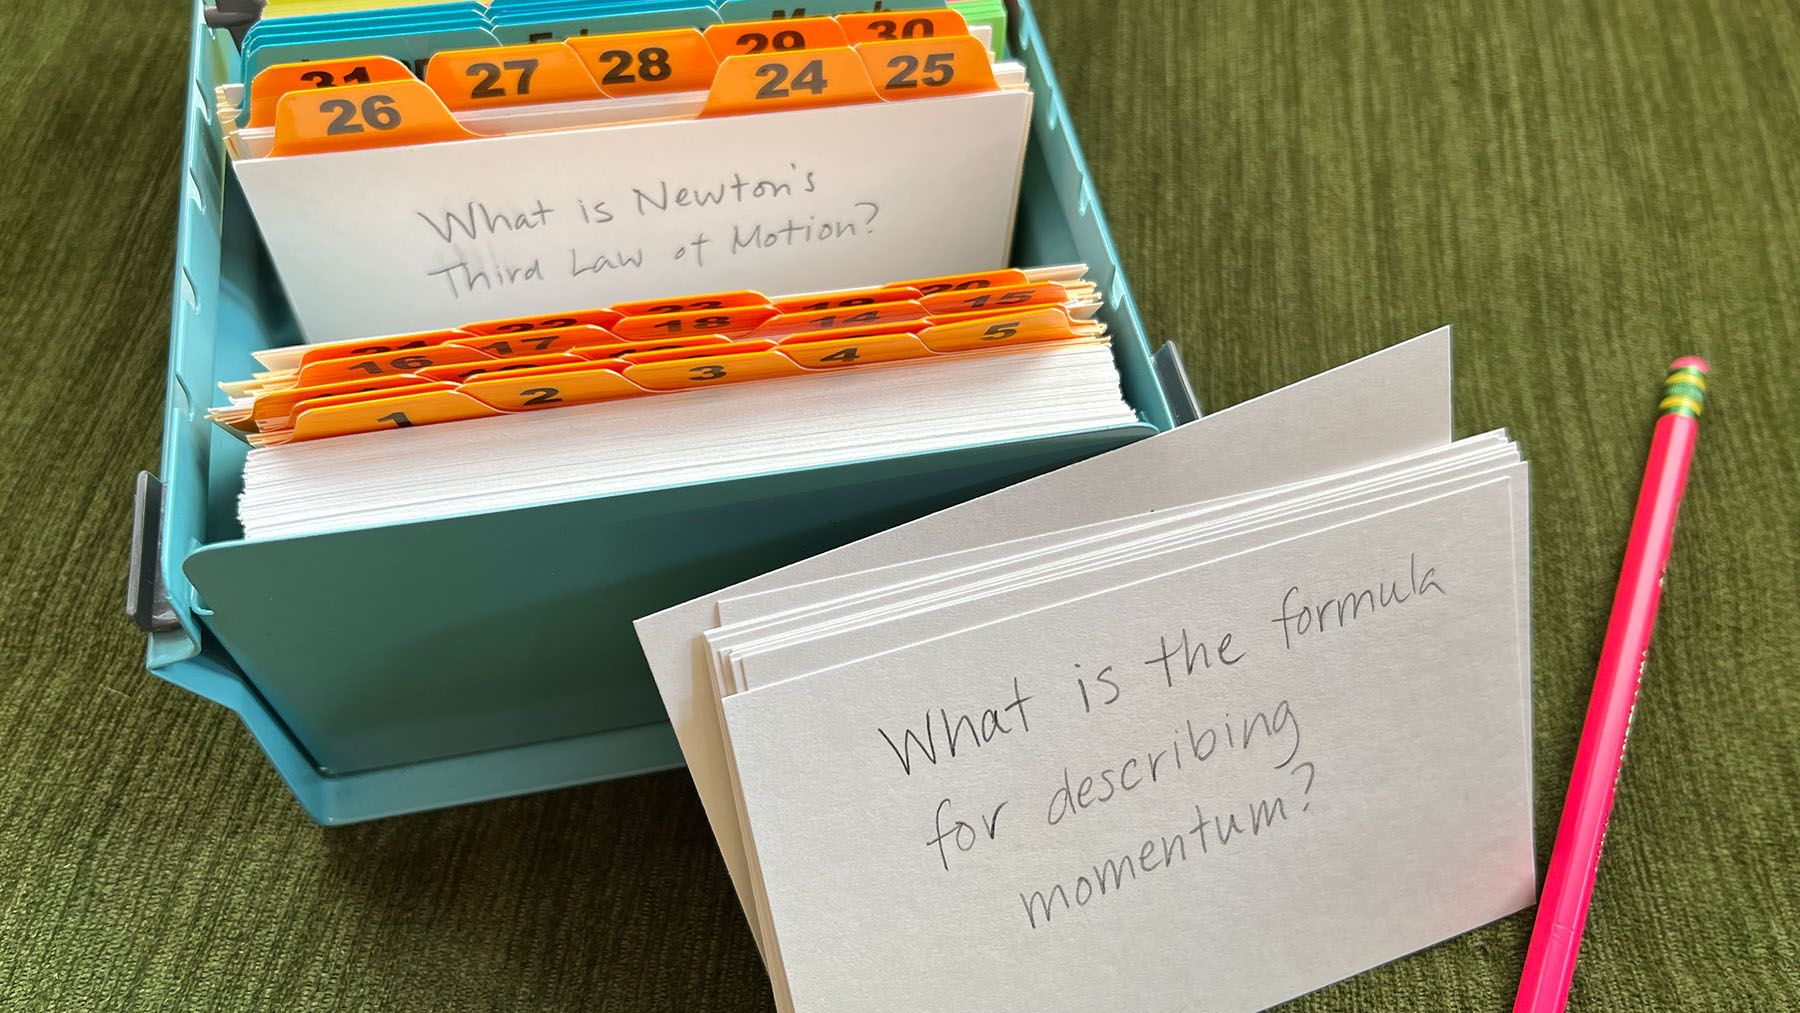 Memory work with flash cards